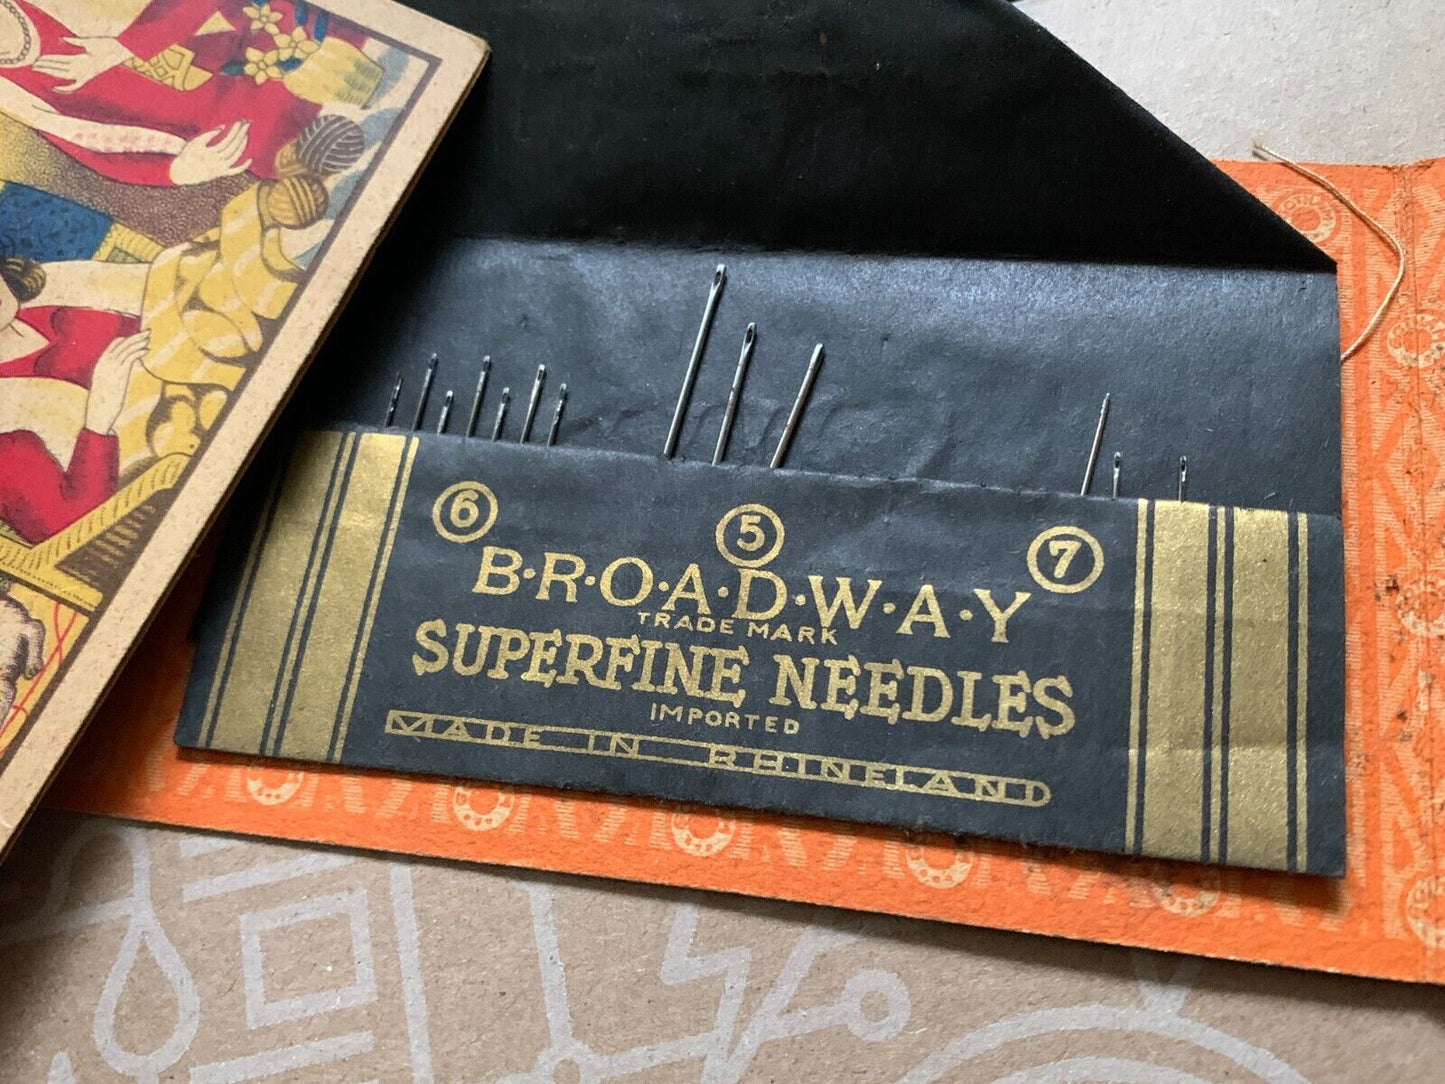 Pair of Antique BROADWAY NEEDLE ASSORTMENT BOOKLETS (Two Different Styles)